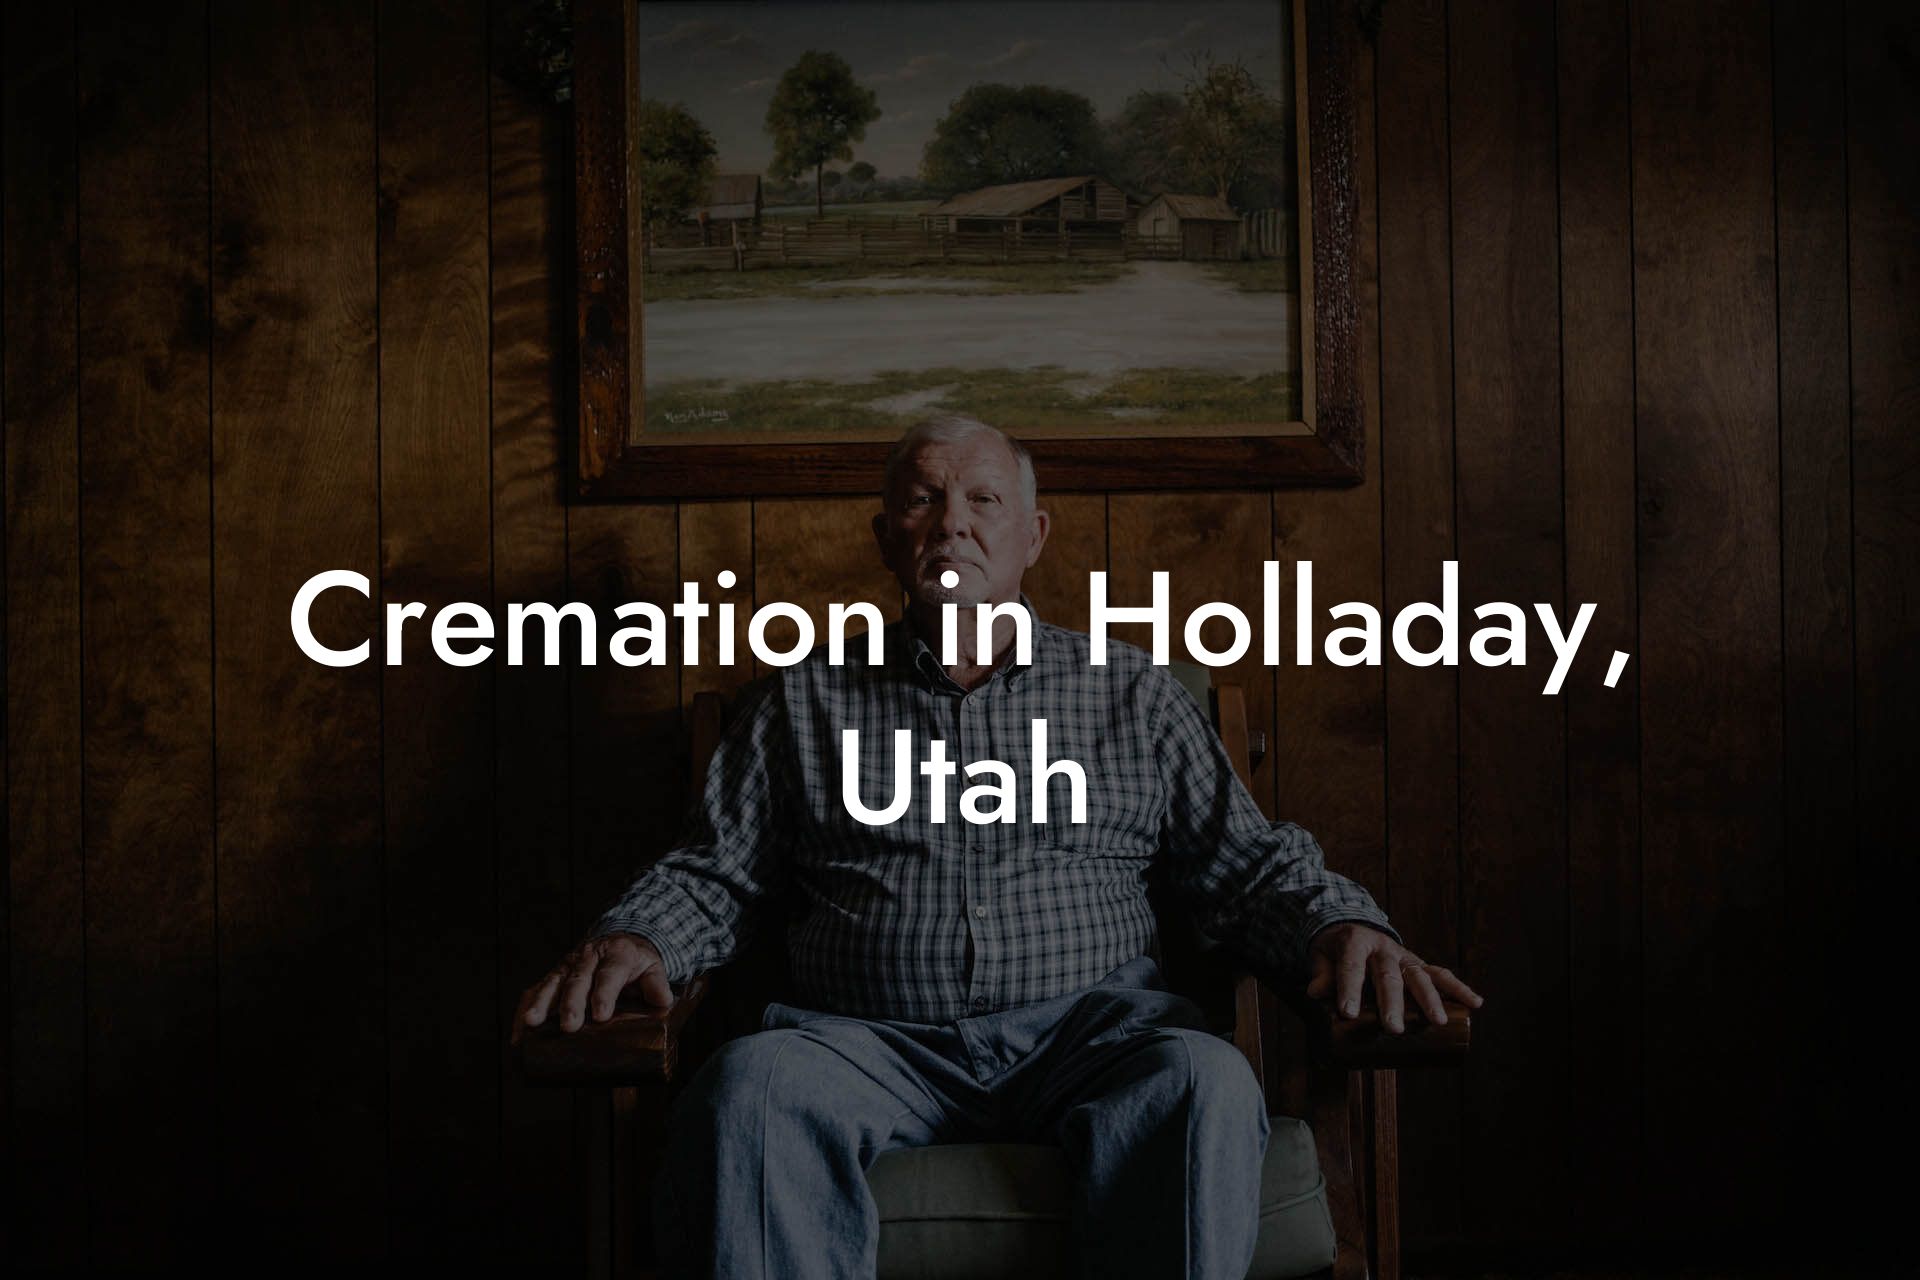 Cremation in Holladay, Utah